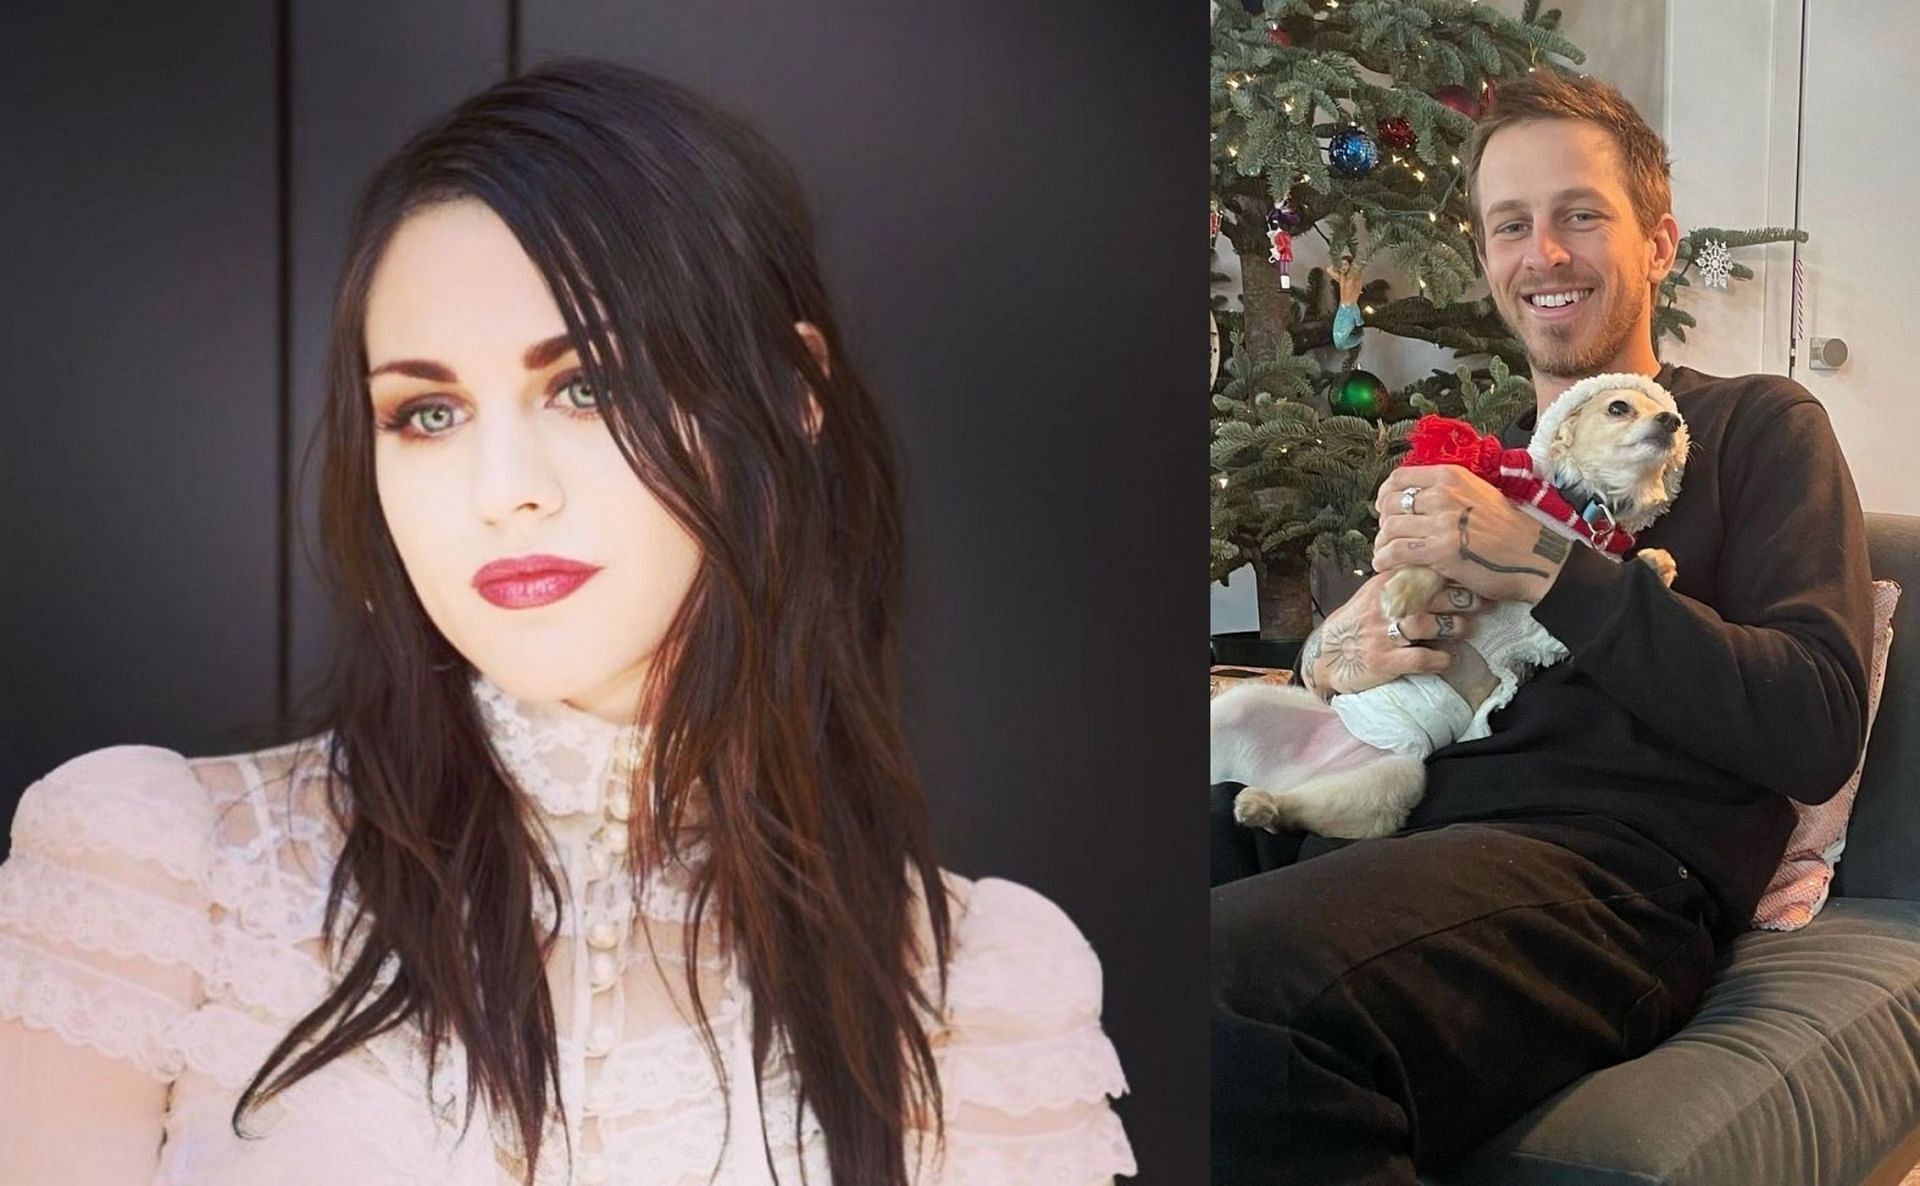 Courtney Love's Daughter Frances Bean Cobain Is Dating Tony Hawk's